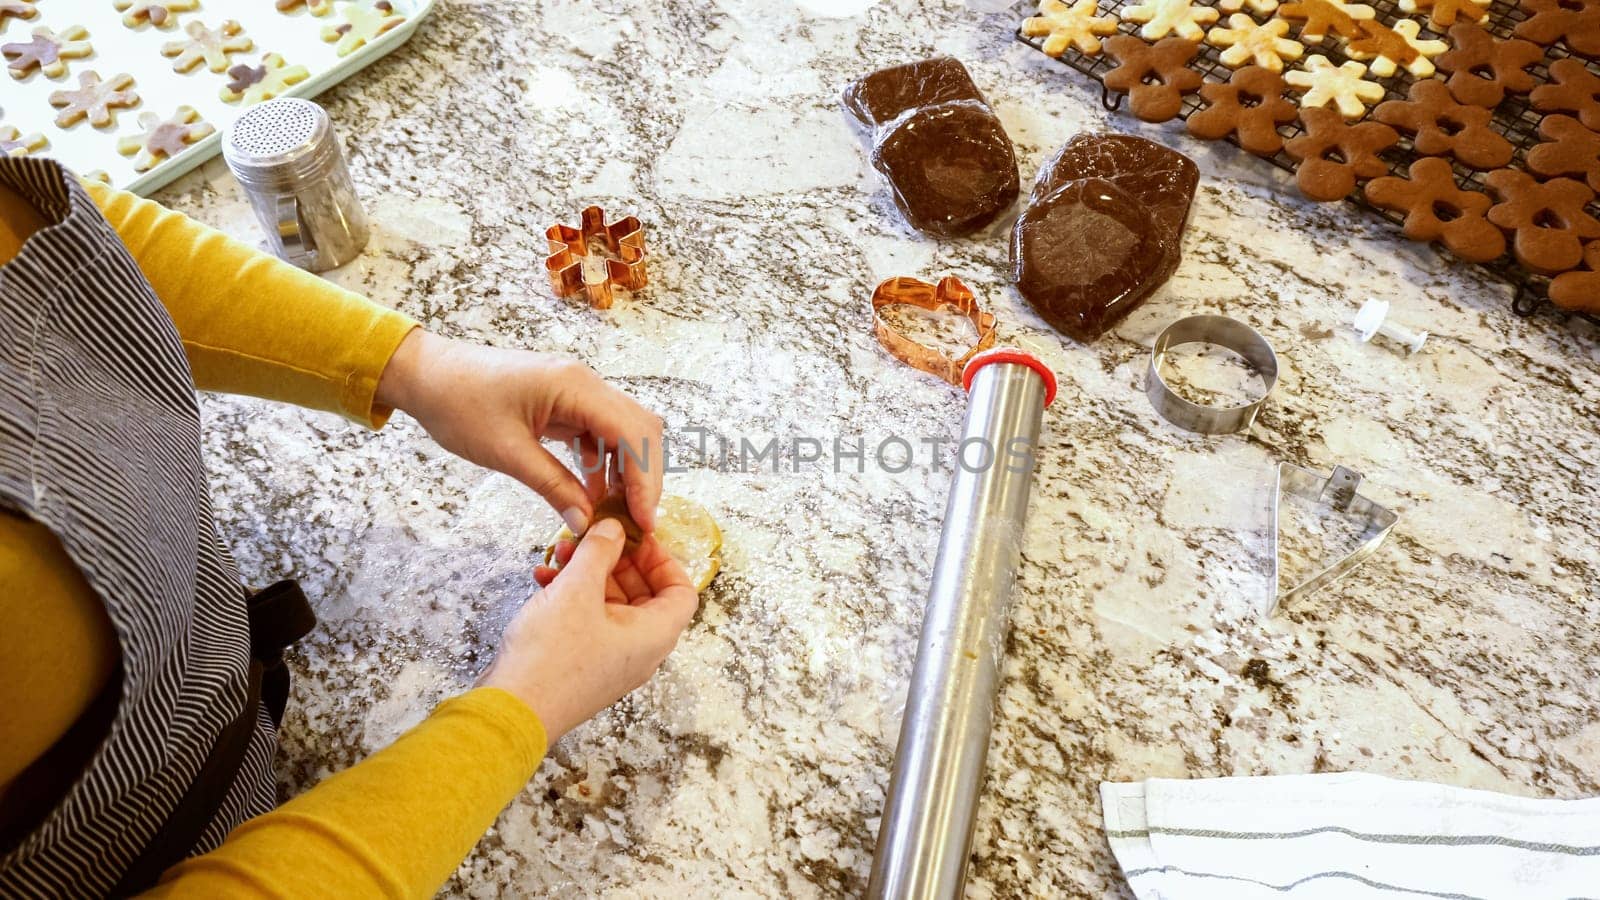 Using an adjustable rolling pin to roll out gingerbread cookie dough on the elegant marble counter in a modern kitchen, getting ready for festive holiday baking.